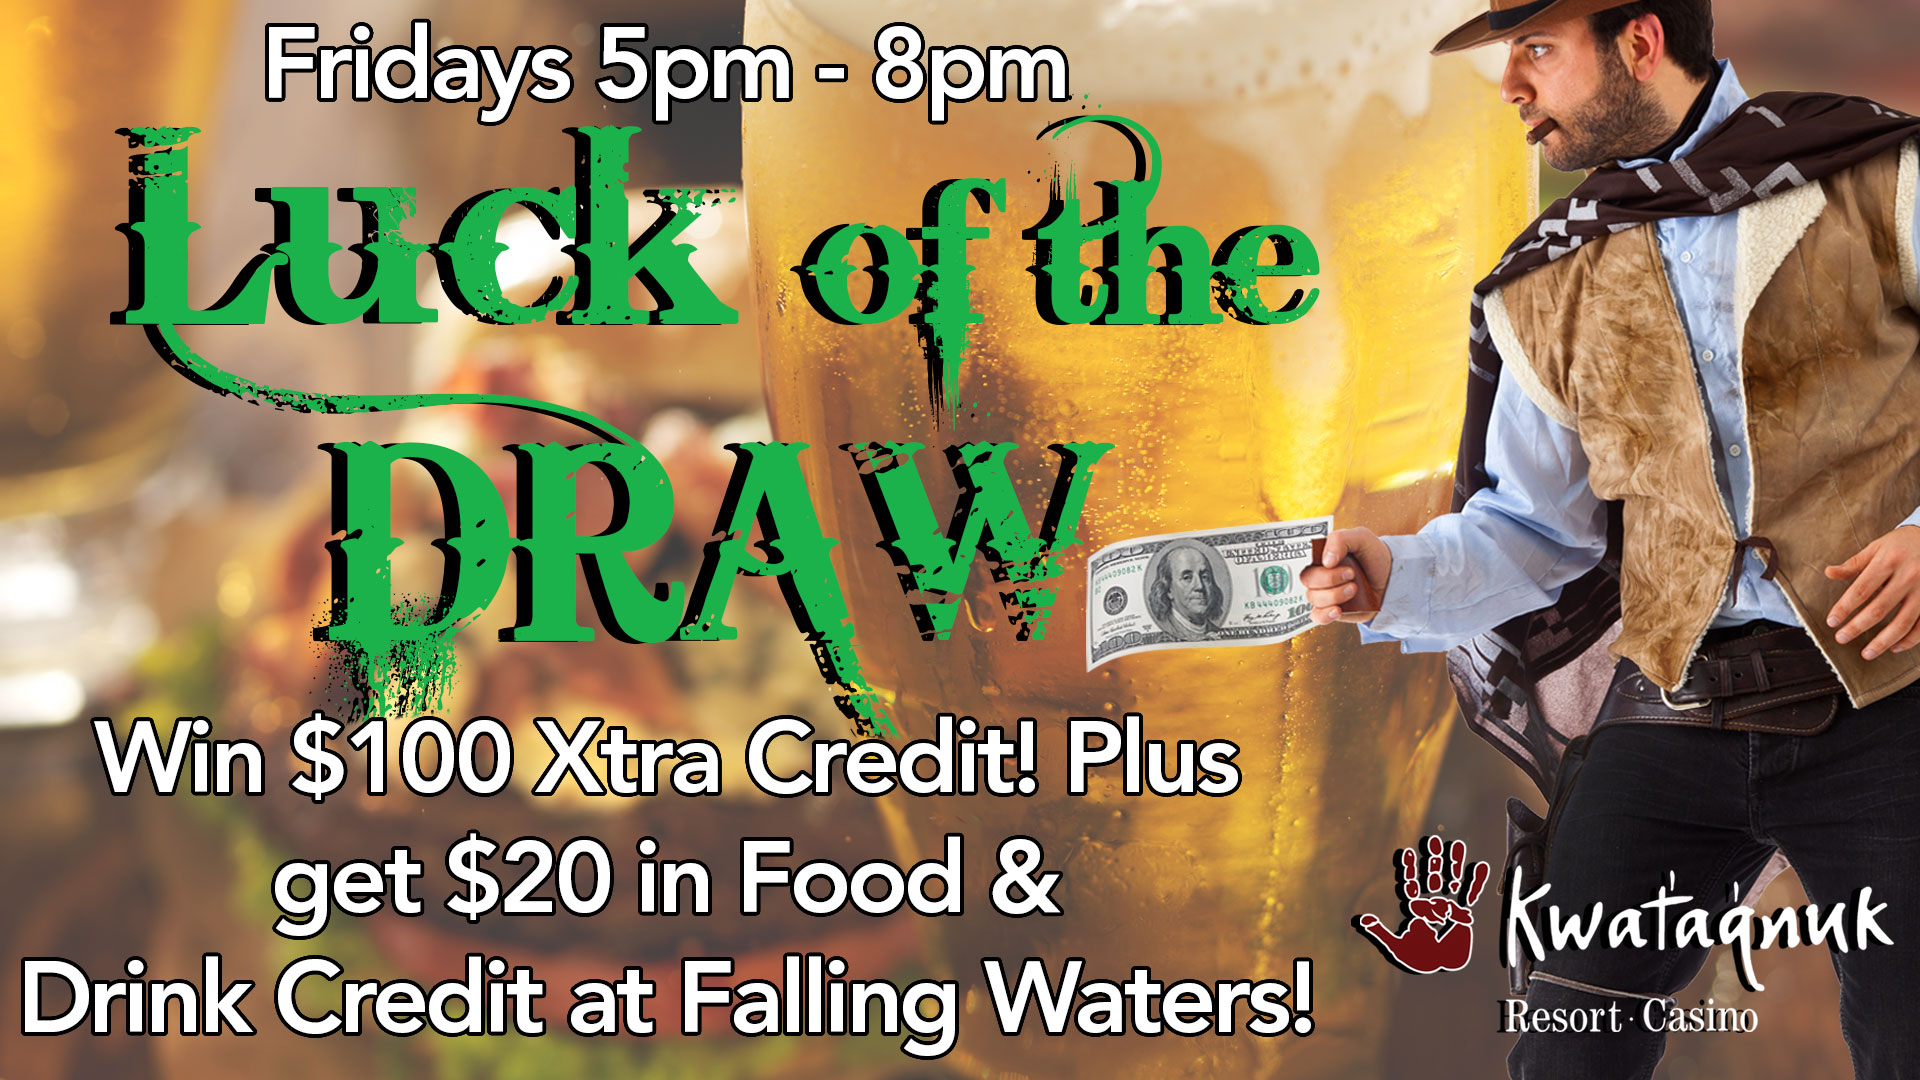 Montana casinos, hot seat drawing, Falling Waters, Food & Drink, Xtra Credit, Fridays